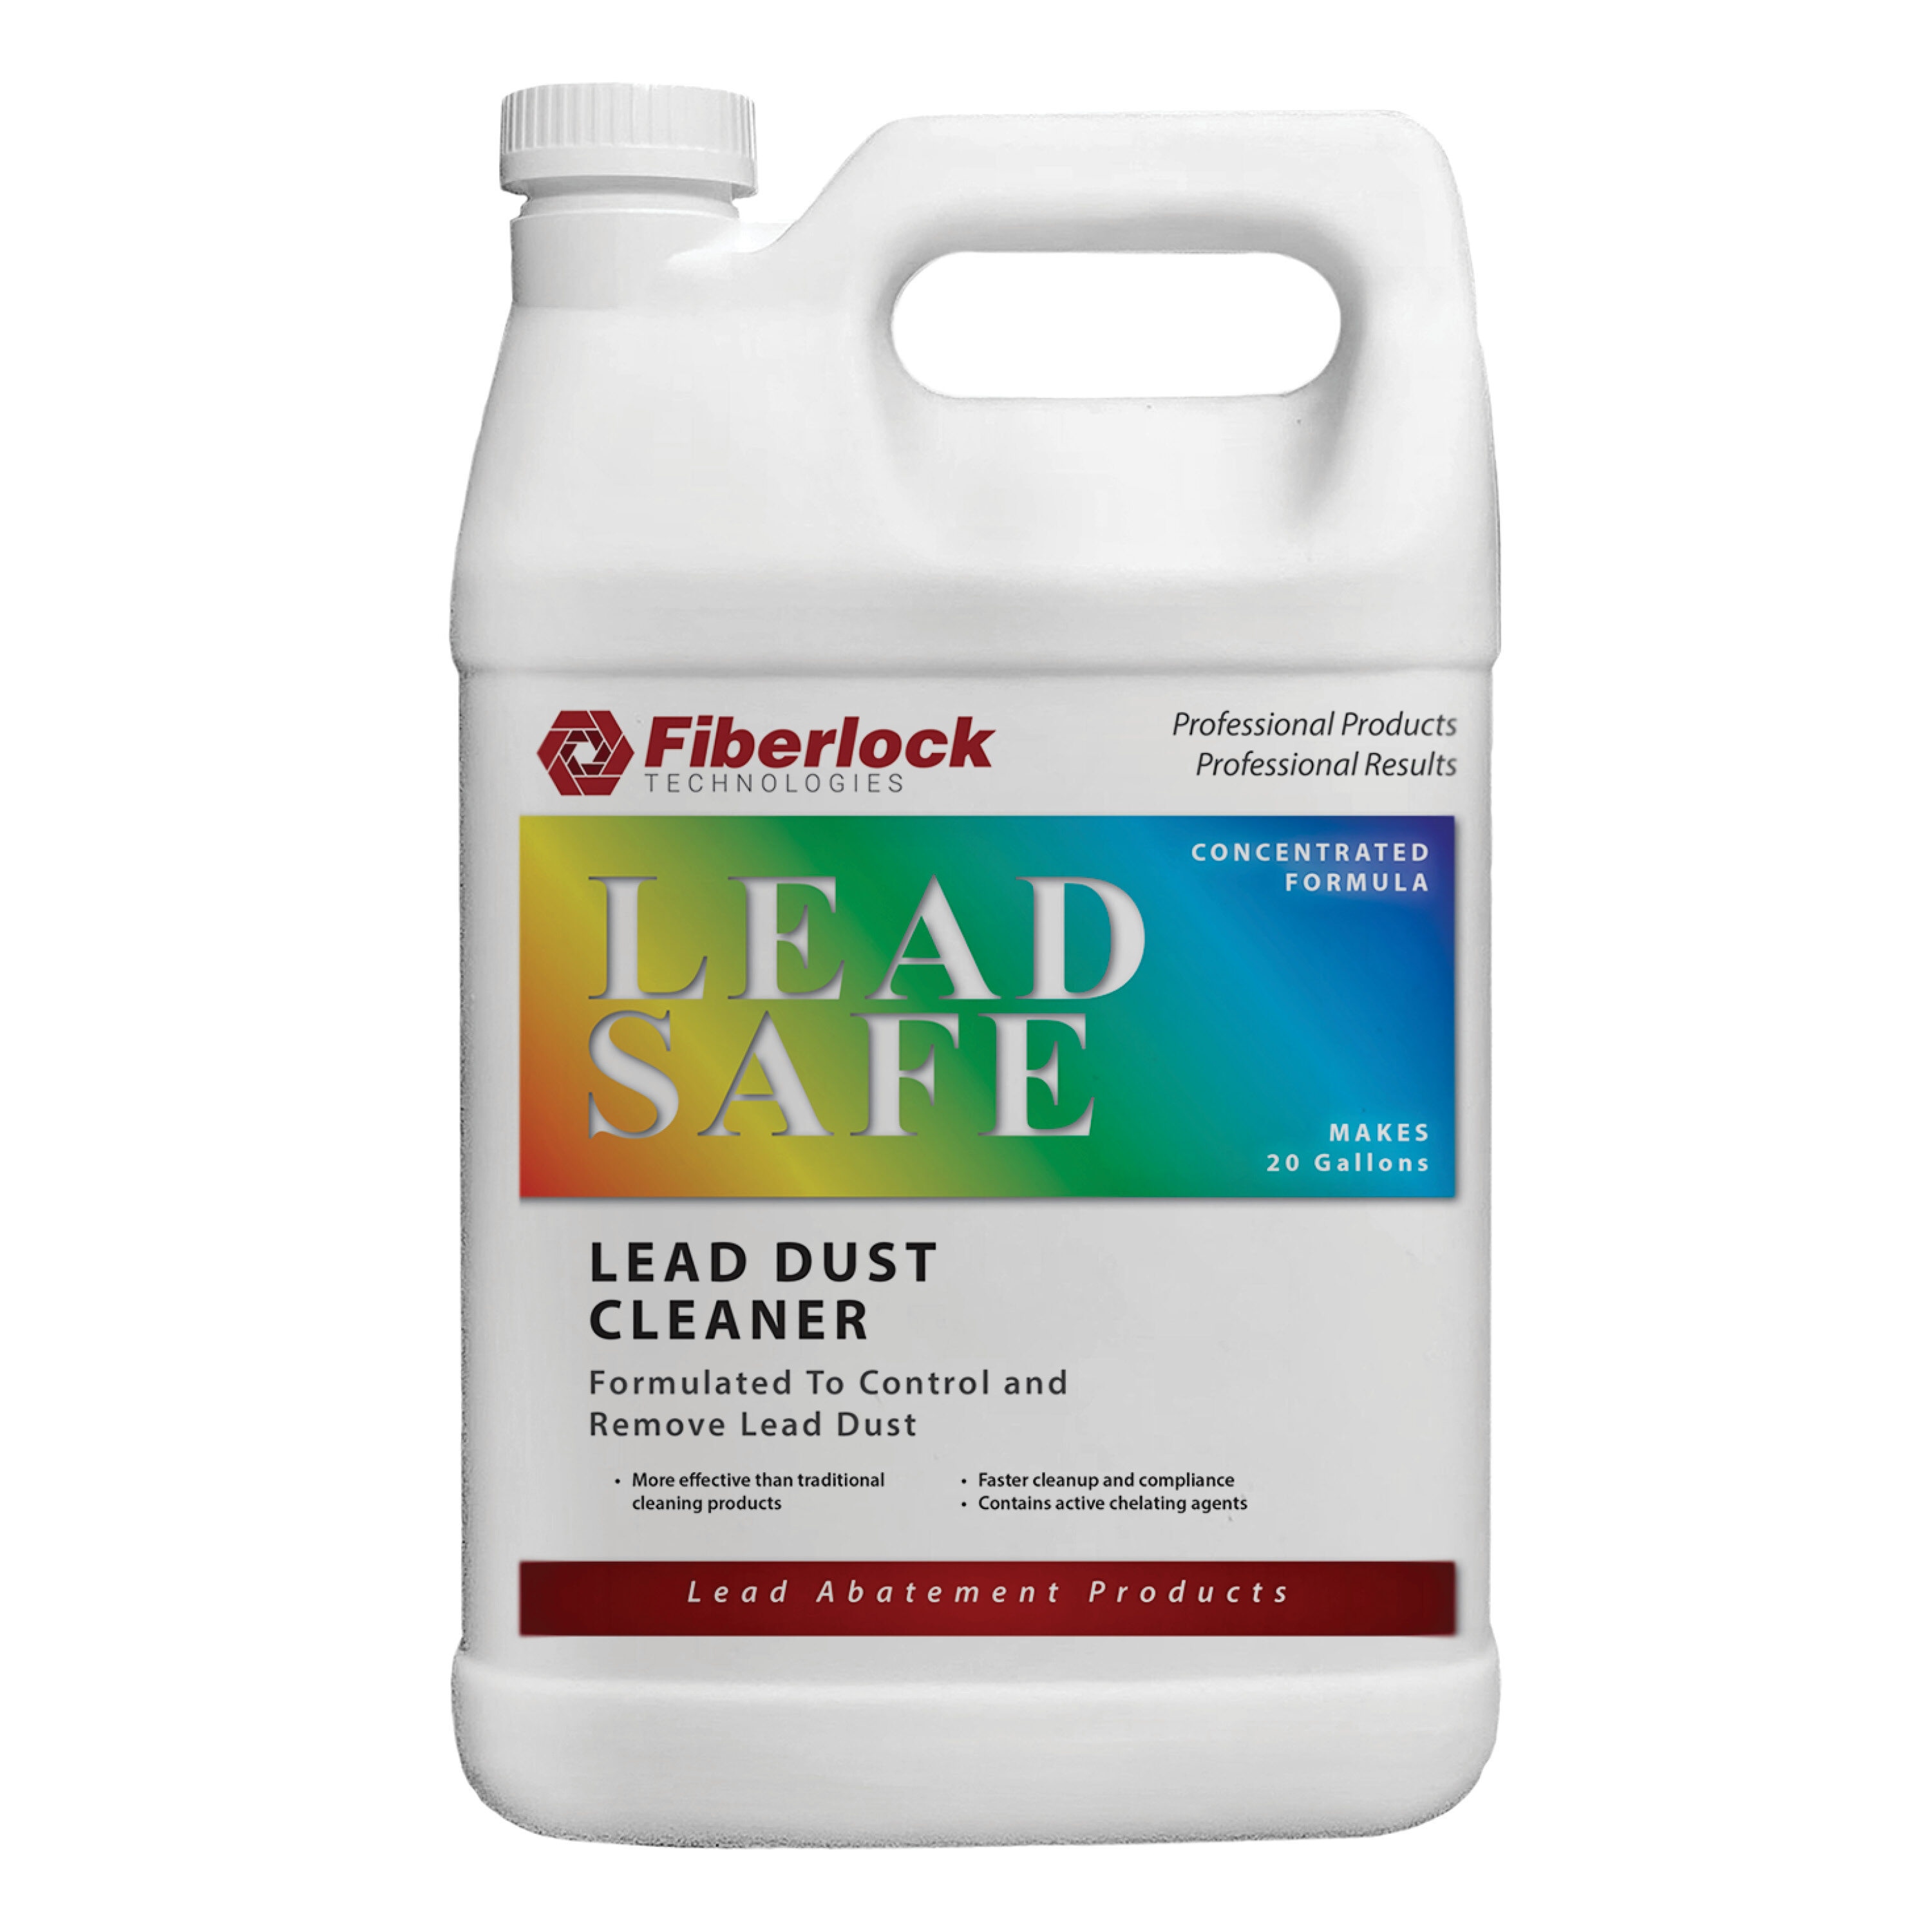 Fiberlock LEAD SAFE Lead Dust Cleaner 1 Gallon - Effective &  Environmentally Friendly Solution for Lead Dust Removal in the Paint  Cleanup department at